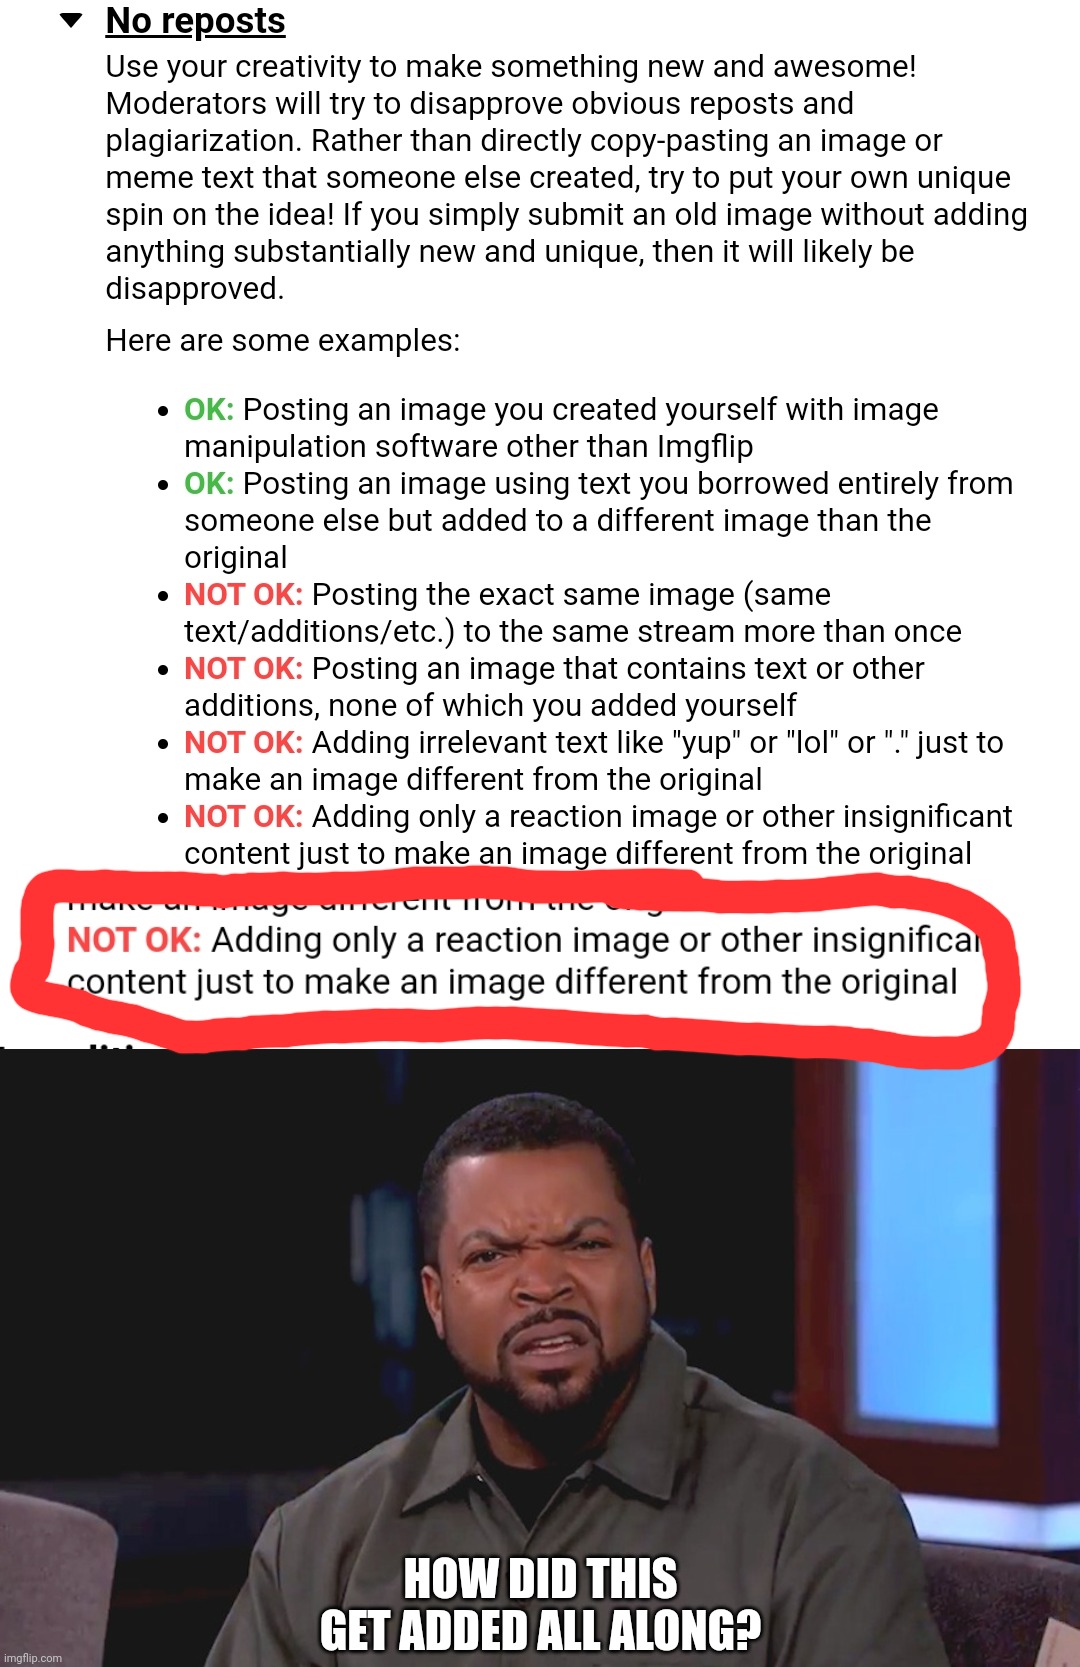 How?! Is this new?! | HOW DID THIS GET ADDED ALL ALONG? | image tagged in really ice cube,no reposts,imgflip | made w/ Imgflip meme maker